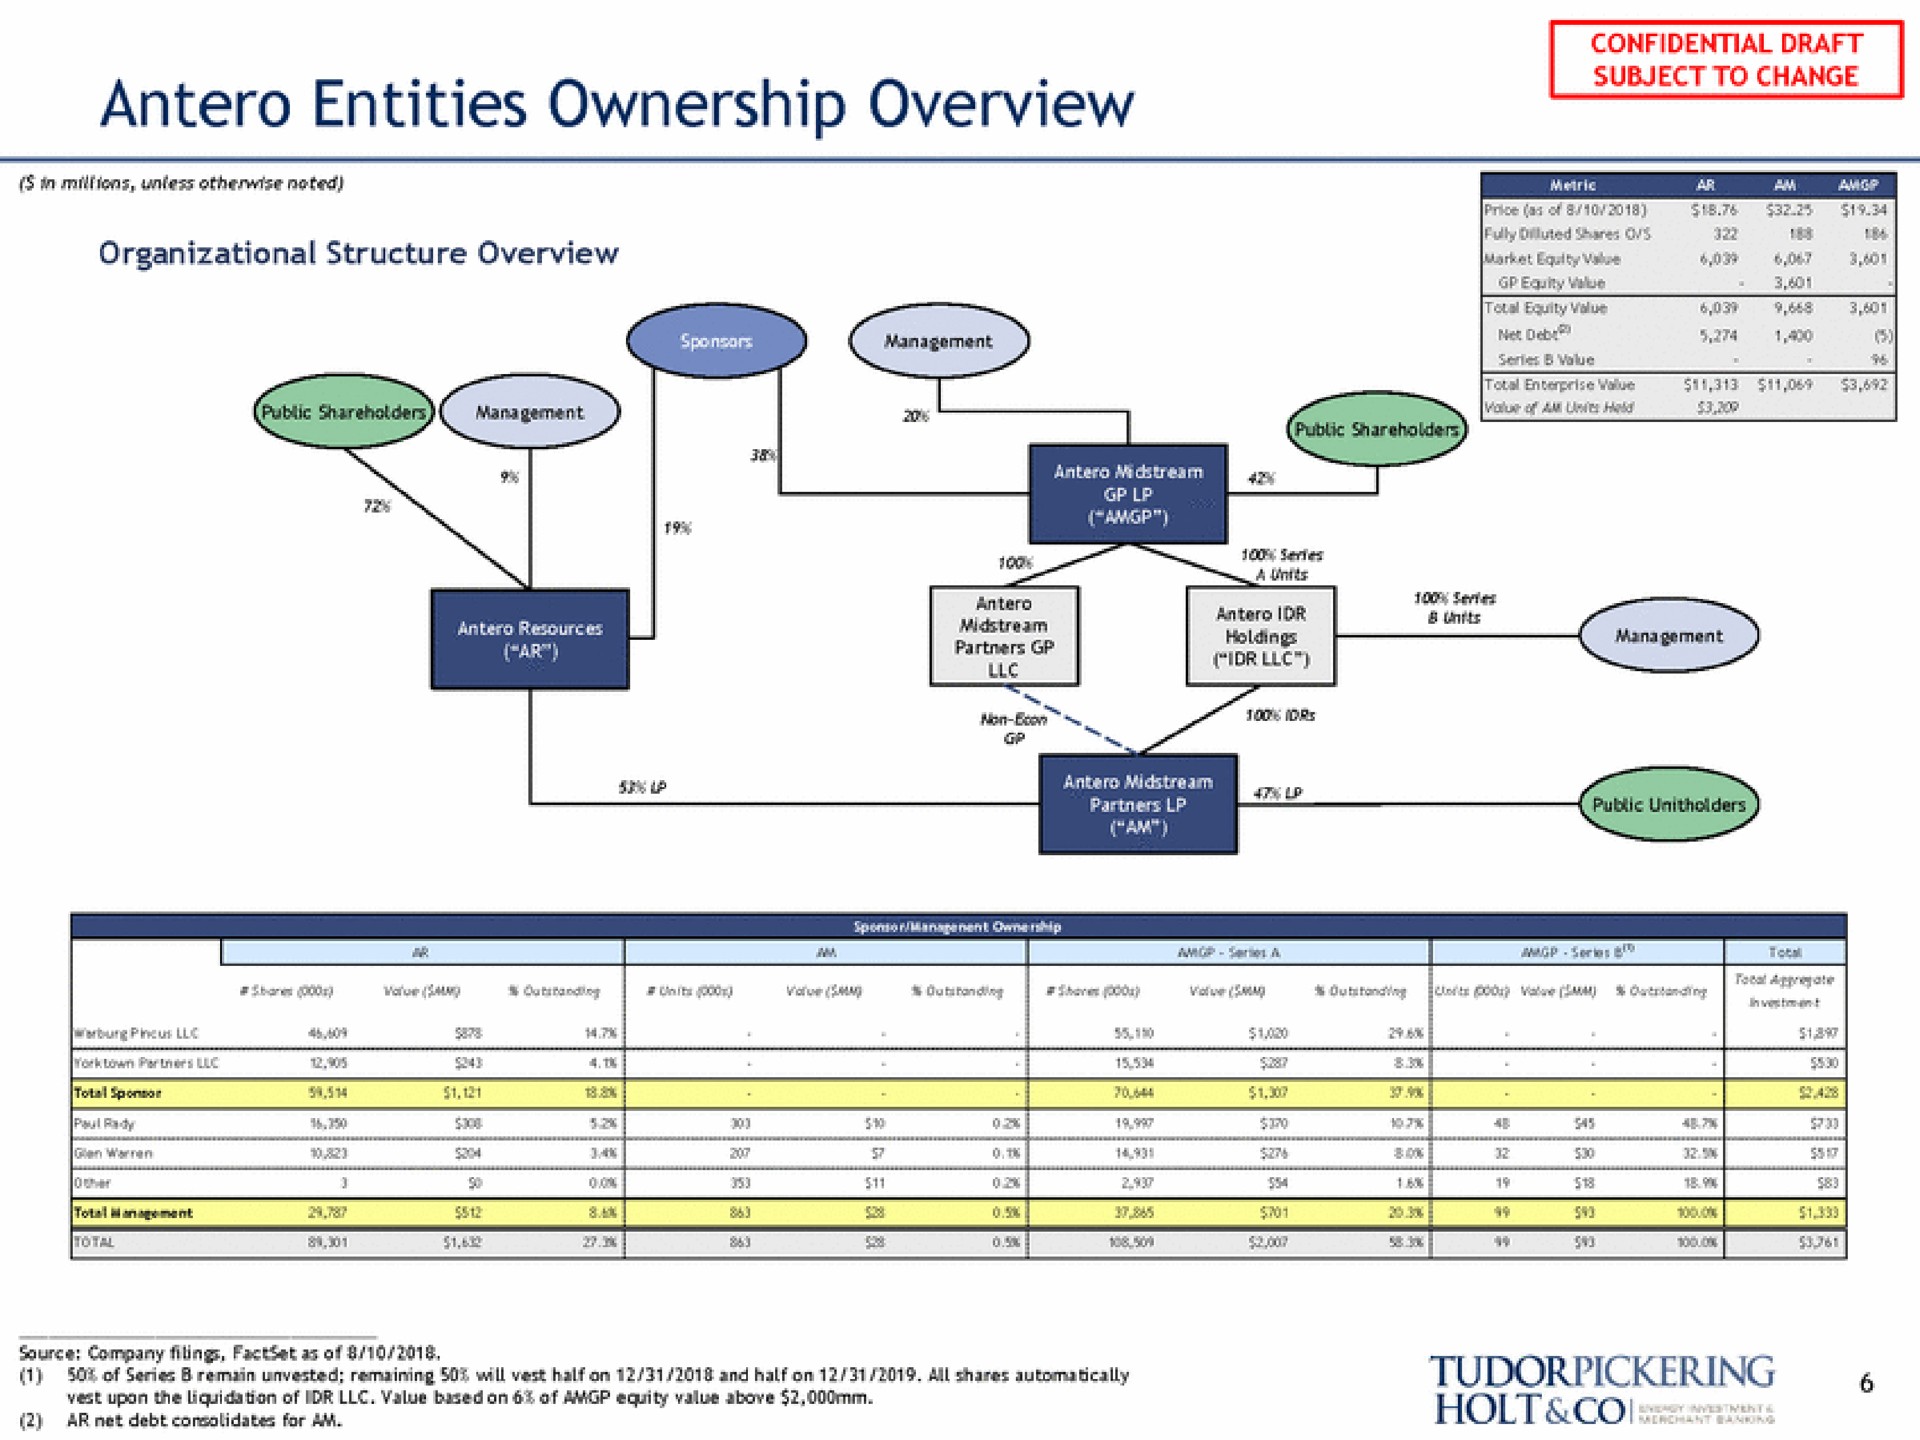 entities ownership overview subject to change | Tudor, Pickering, Holt & Co